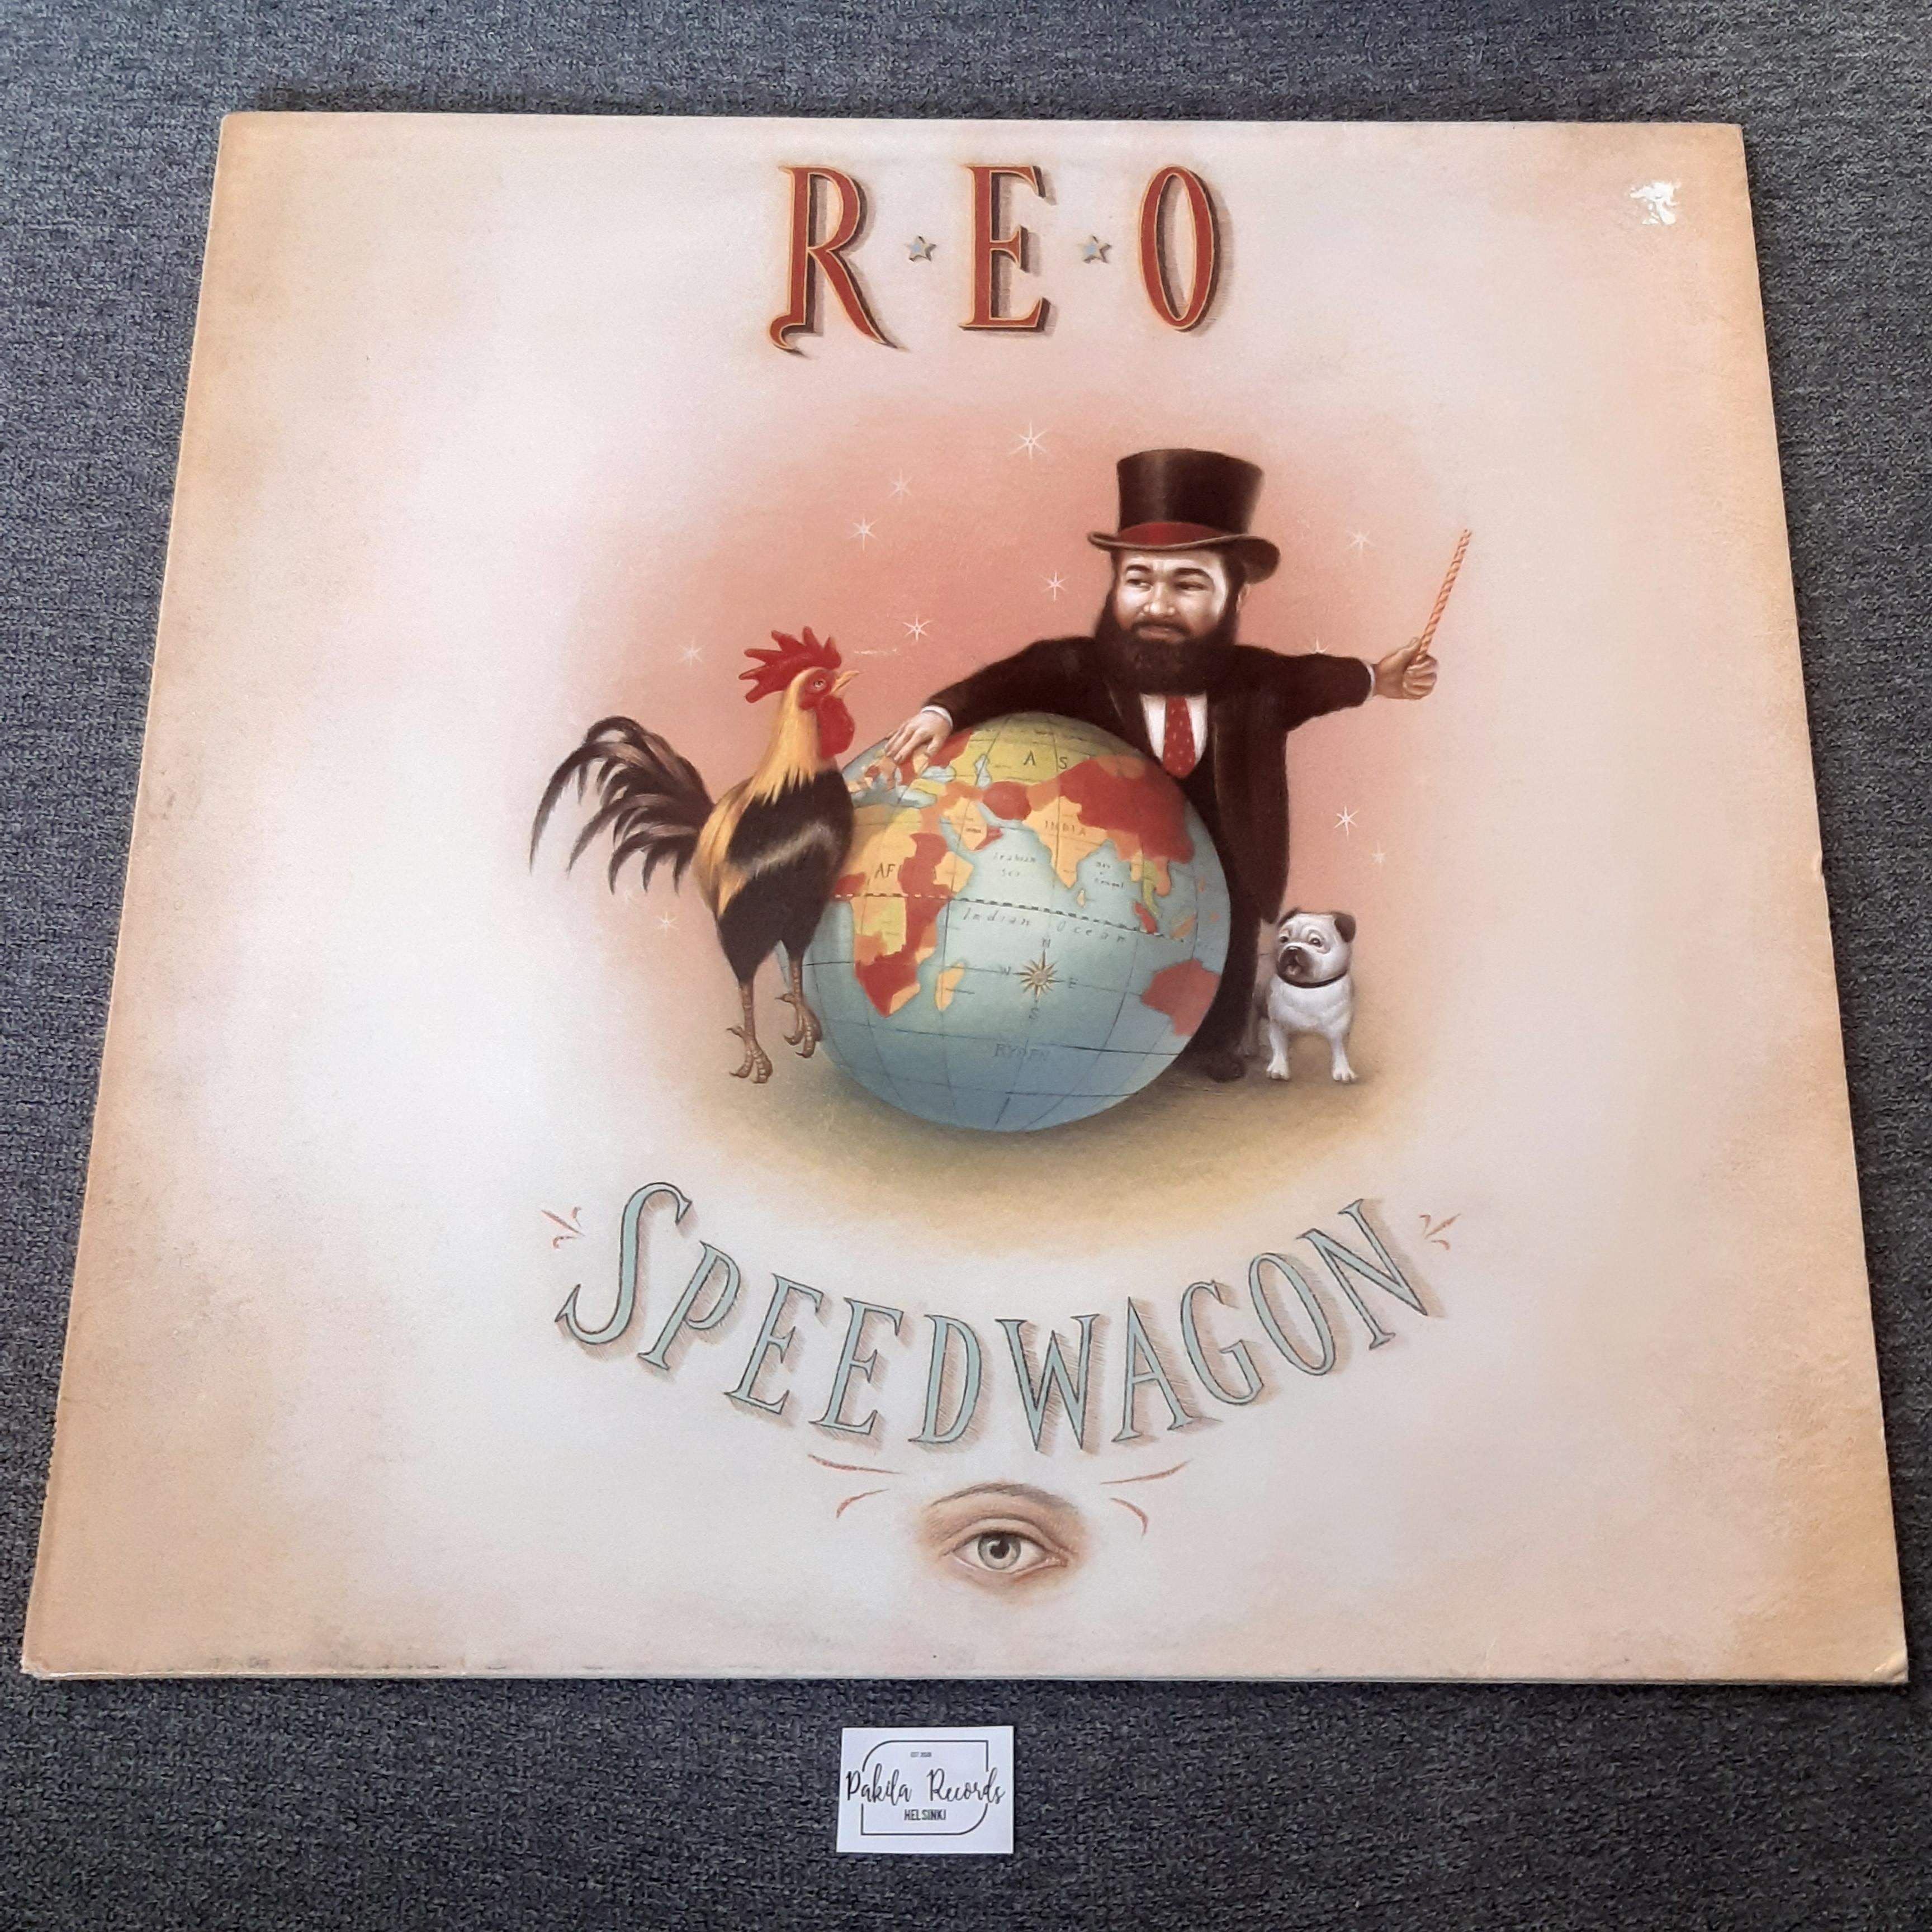 Reo Speedwagon - The Earth A Small Man His Dog And A Chicken - LP (käytetty)